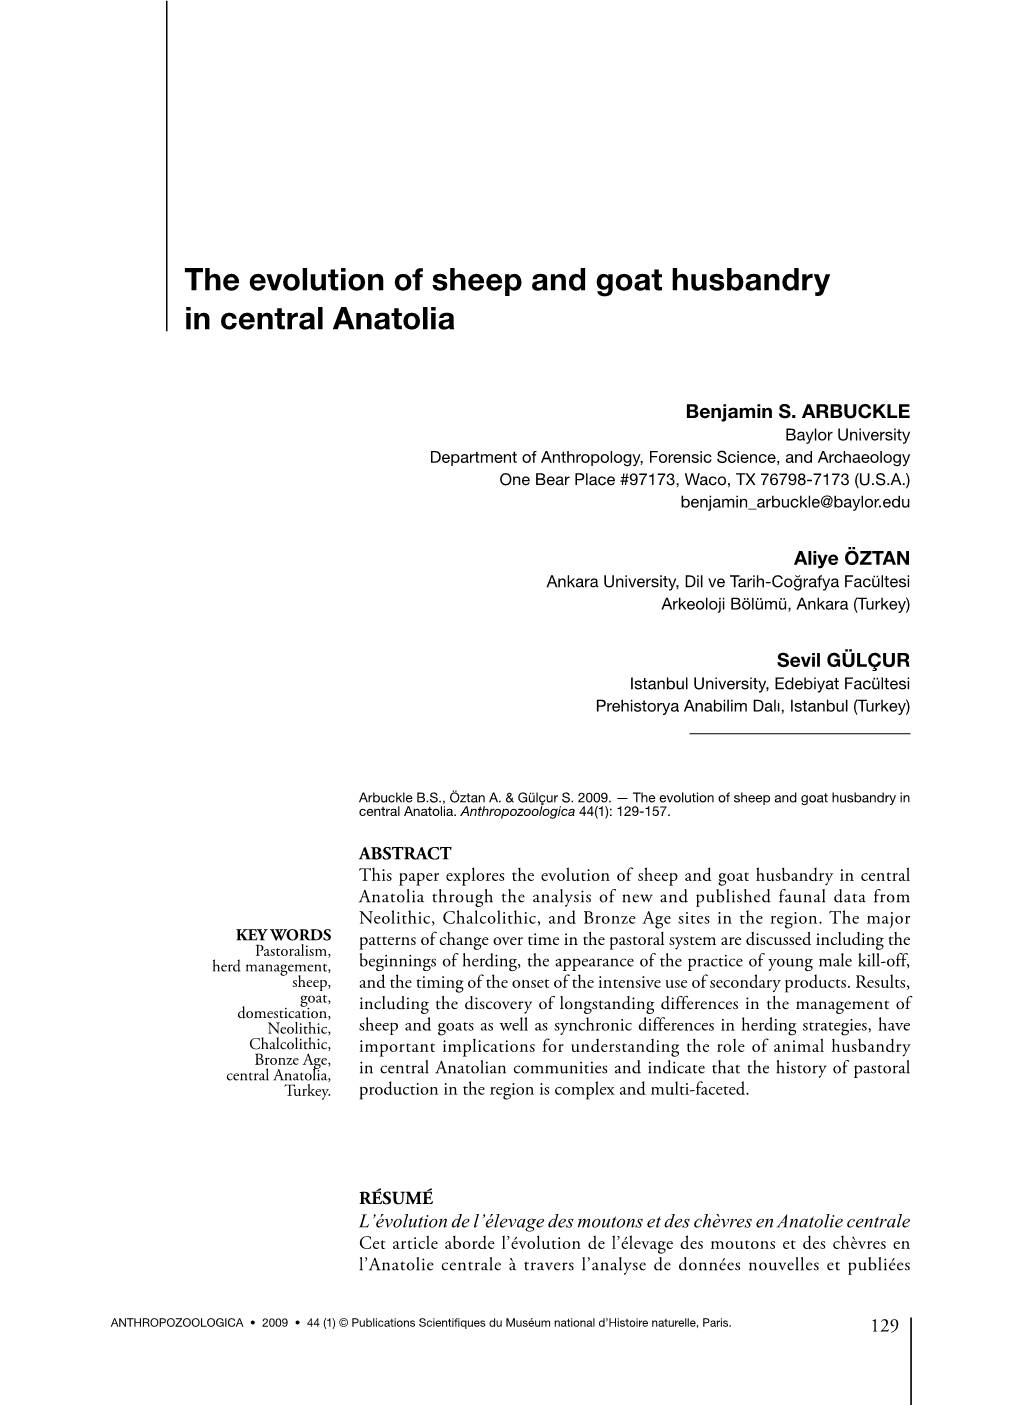 The Evolution of Sheep and Goat Husbandry in Central Anatolia